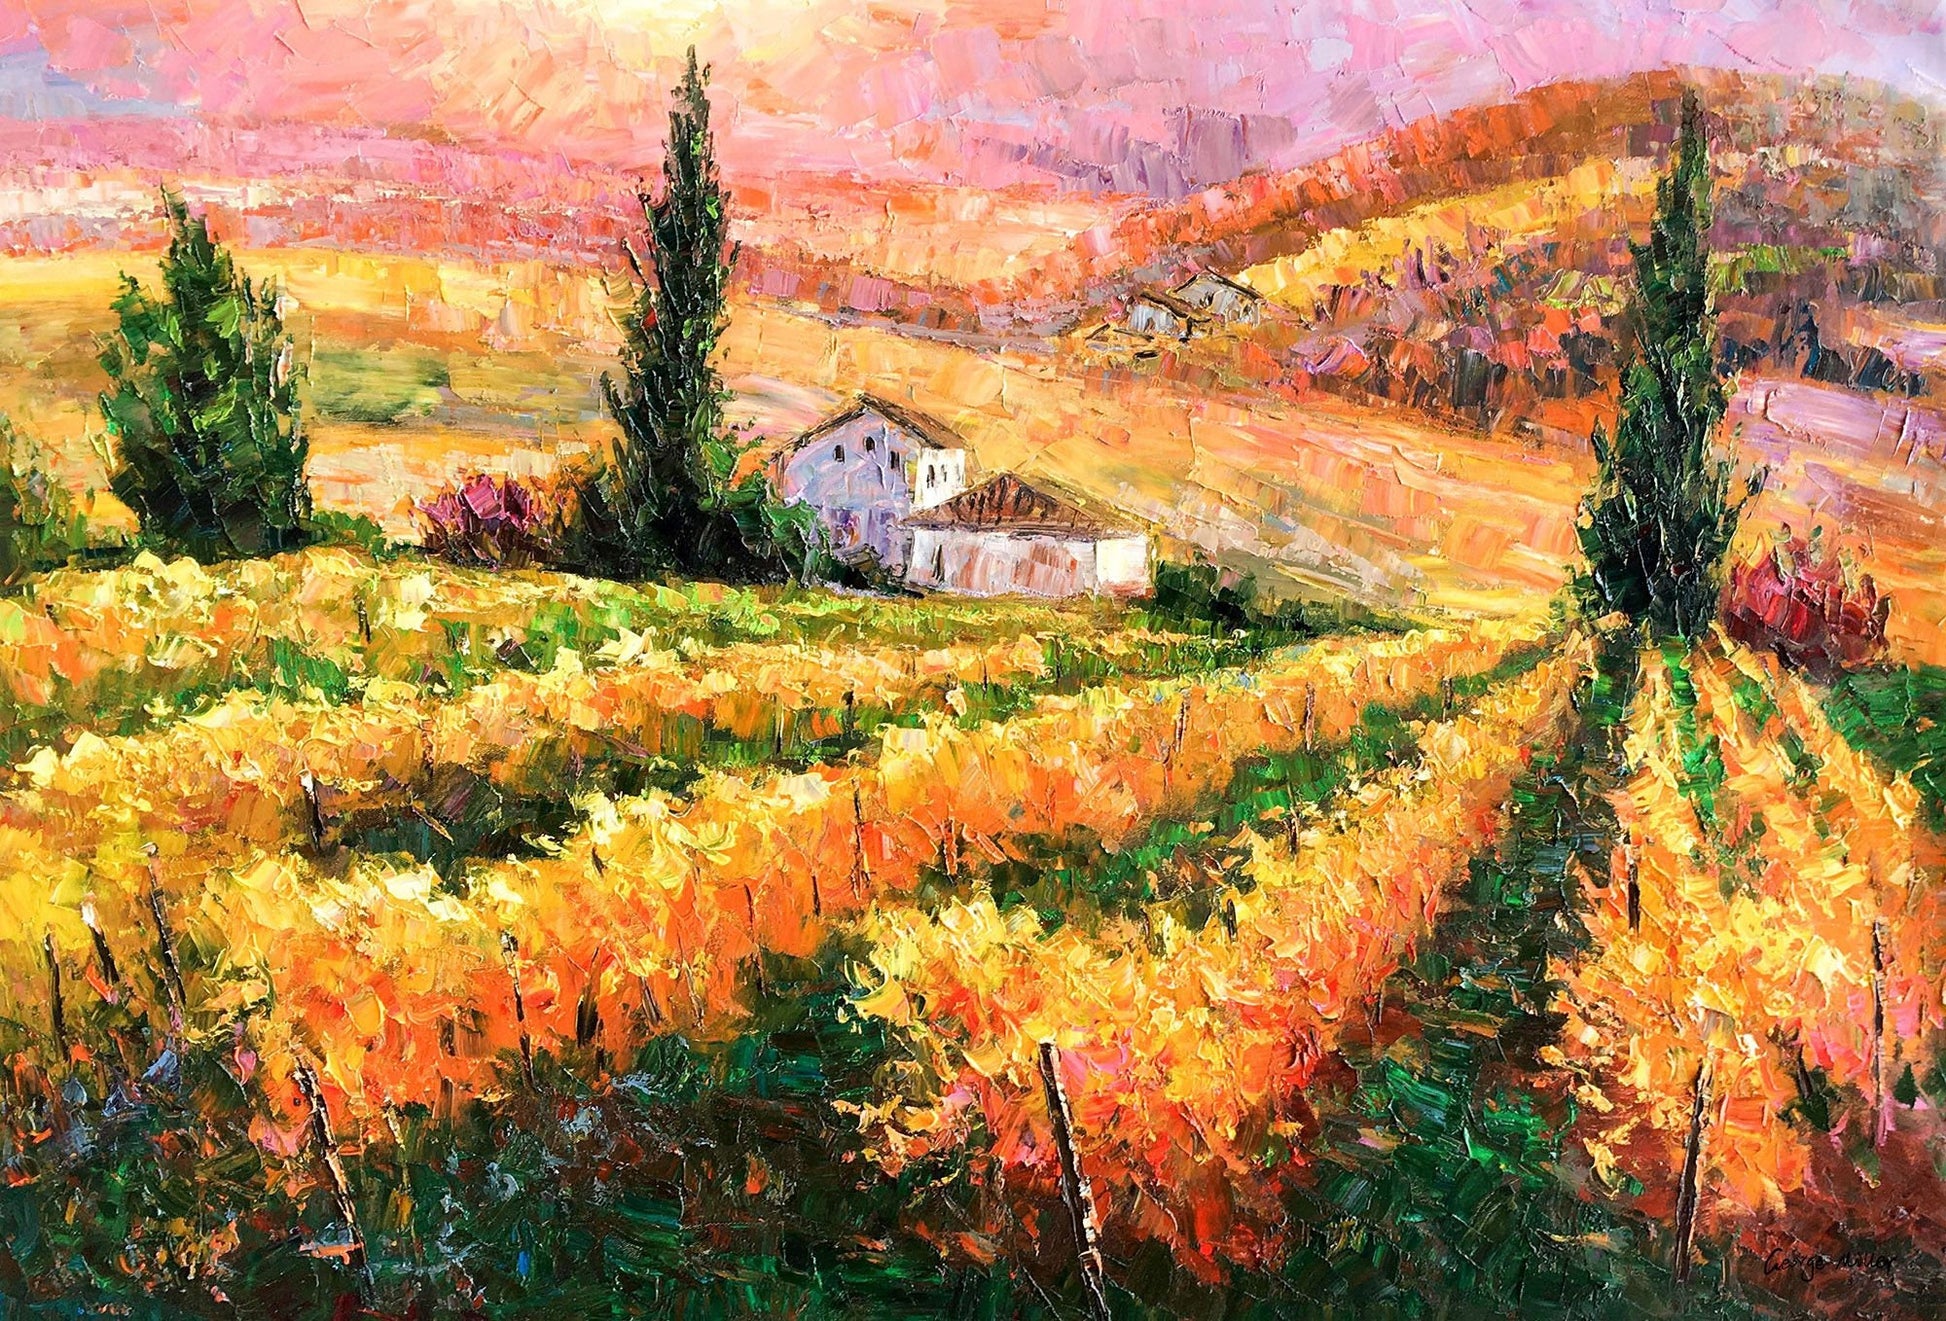 Oil Painting French Vineyard, Abstract Canvas Painting, Wall Decor, Oil Painting Abstract, Modern Painting, Original Oil Painting Landscape